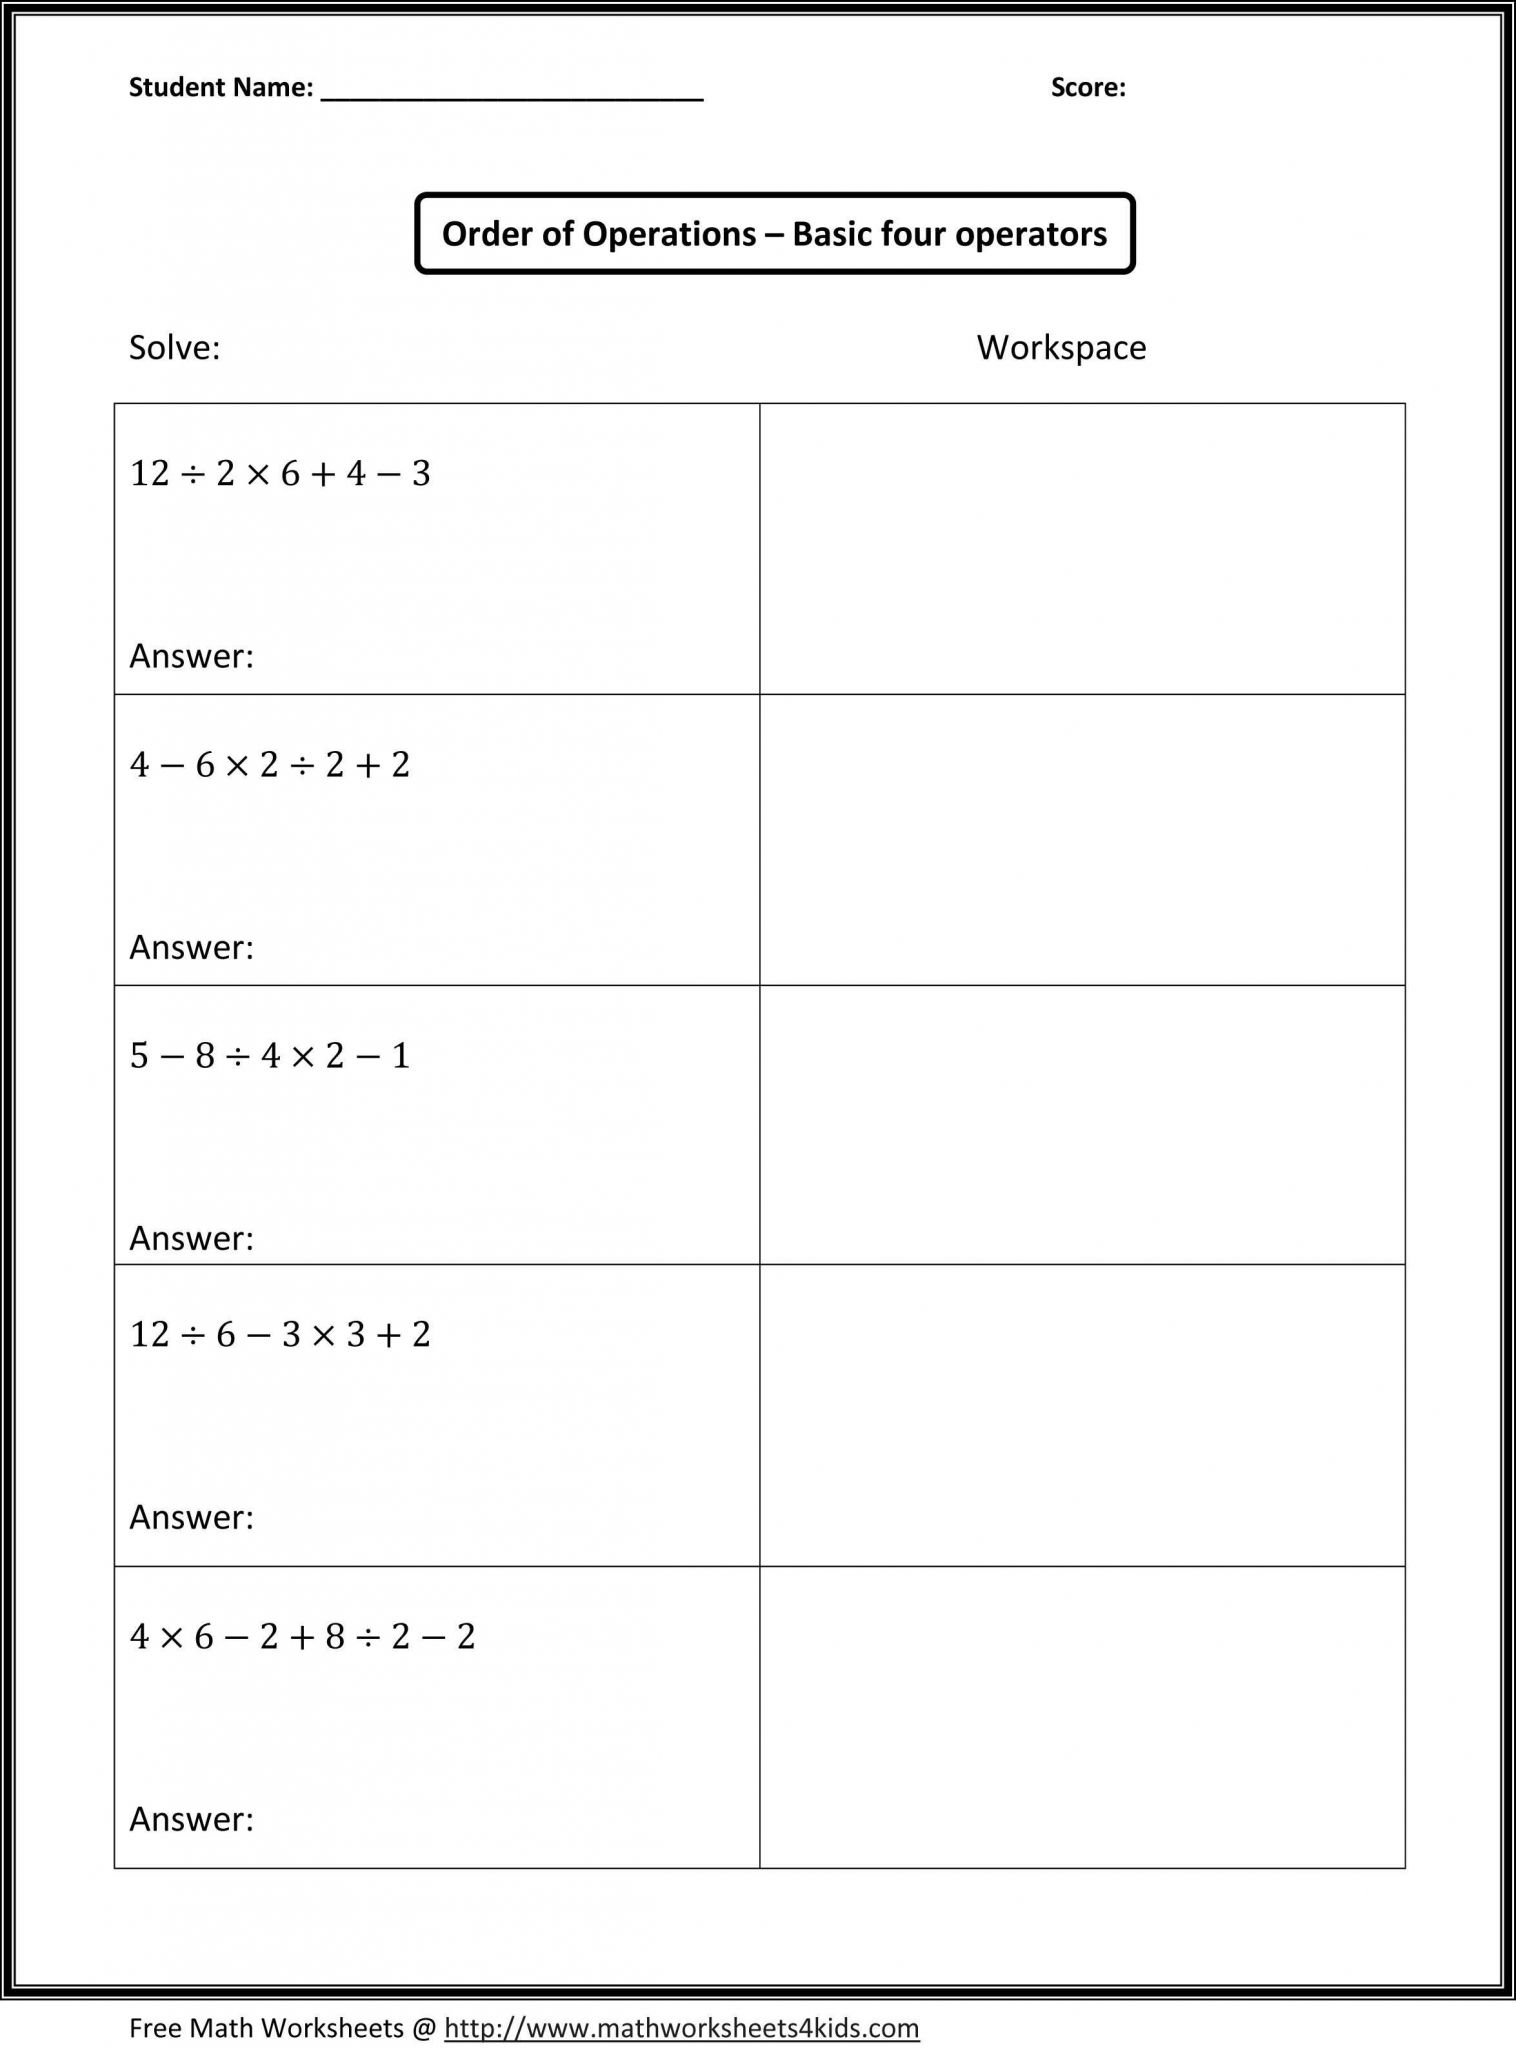 Factor Each Completely Worksheet Answers and 48 Elegant Factoring Distributive Property Worksheet Answers